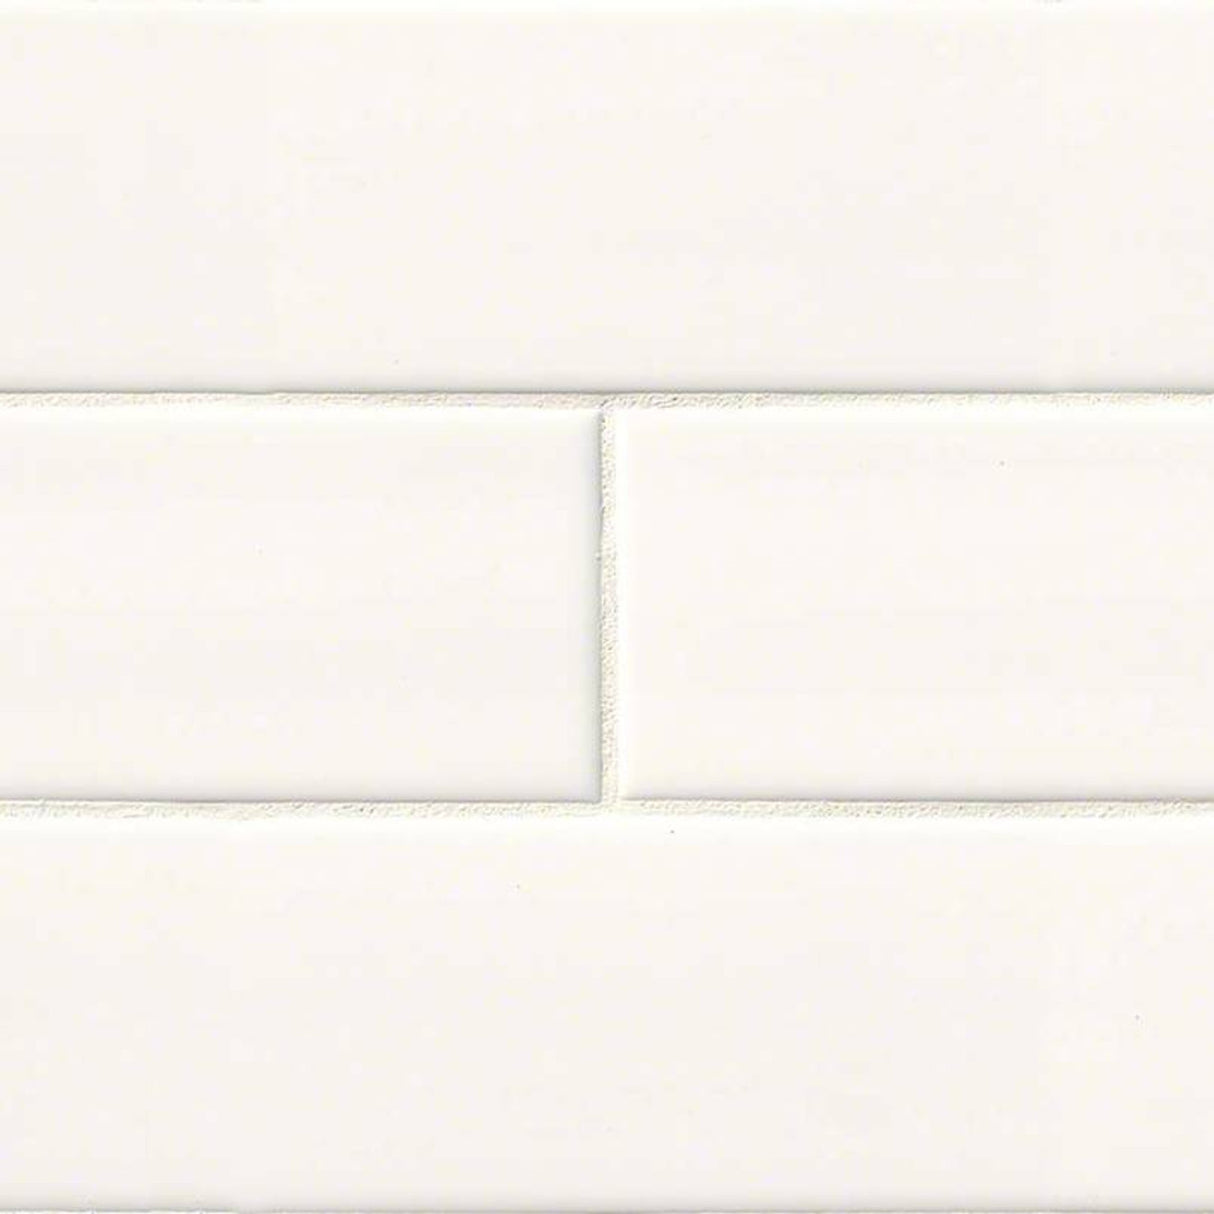 White glossy 4x12 glazed ceramic wall tile msi collection NWHIGLO4X16 product shot multiple tiles angle view #Size_3"x6"